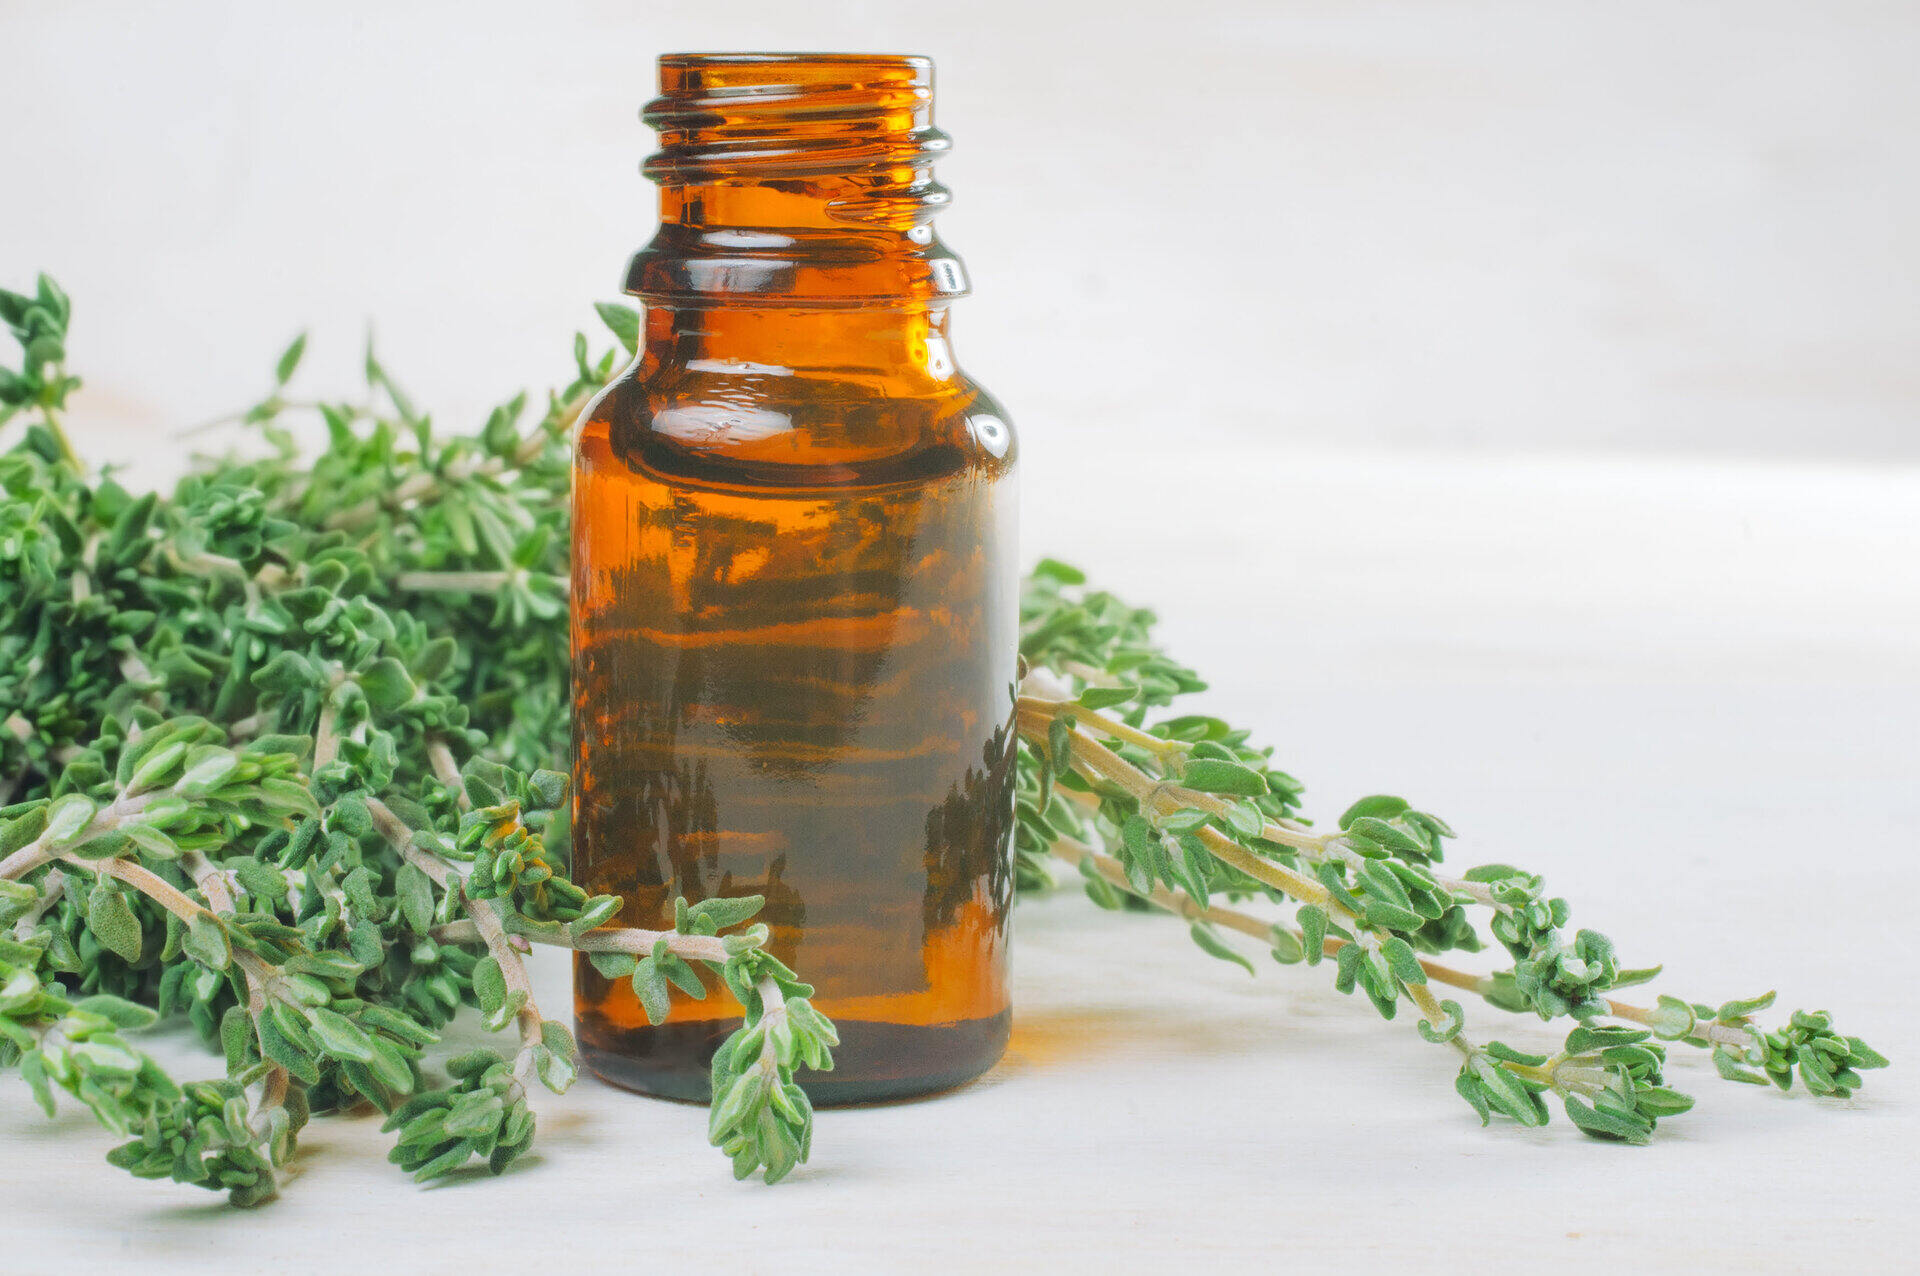 What Is White Thyme Oil Used For